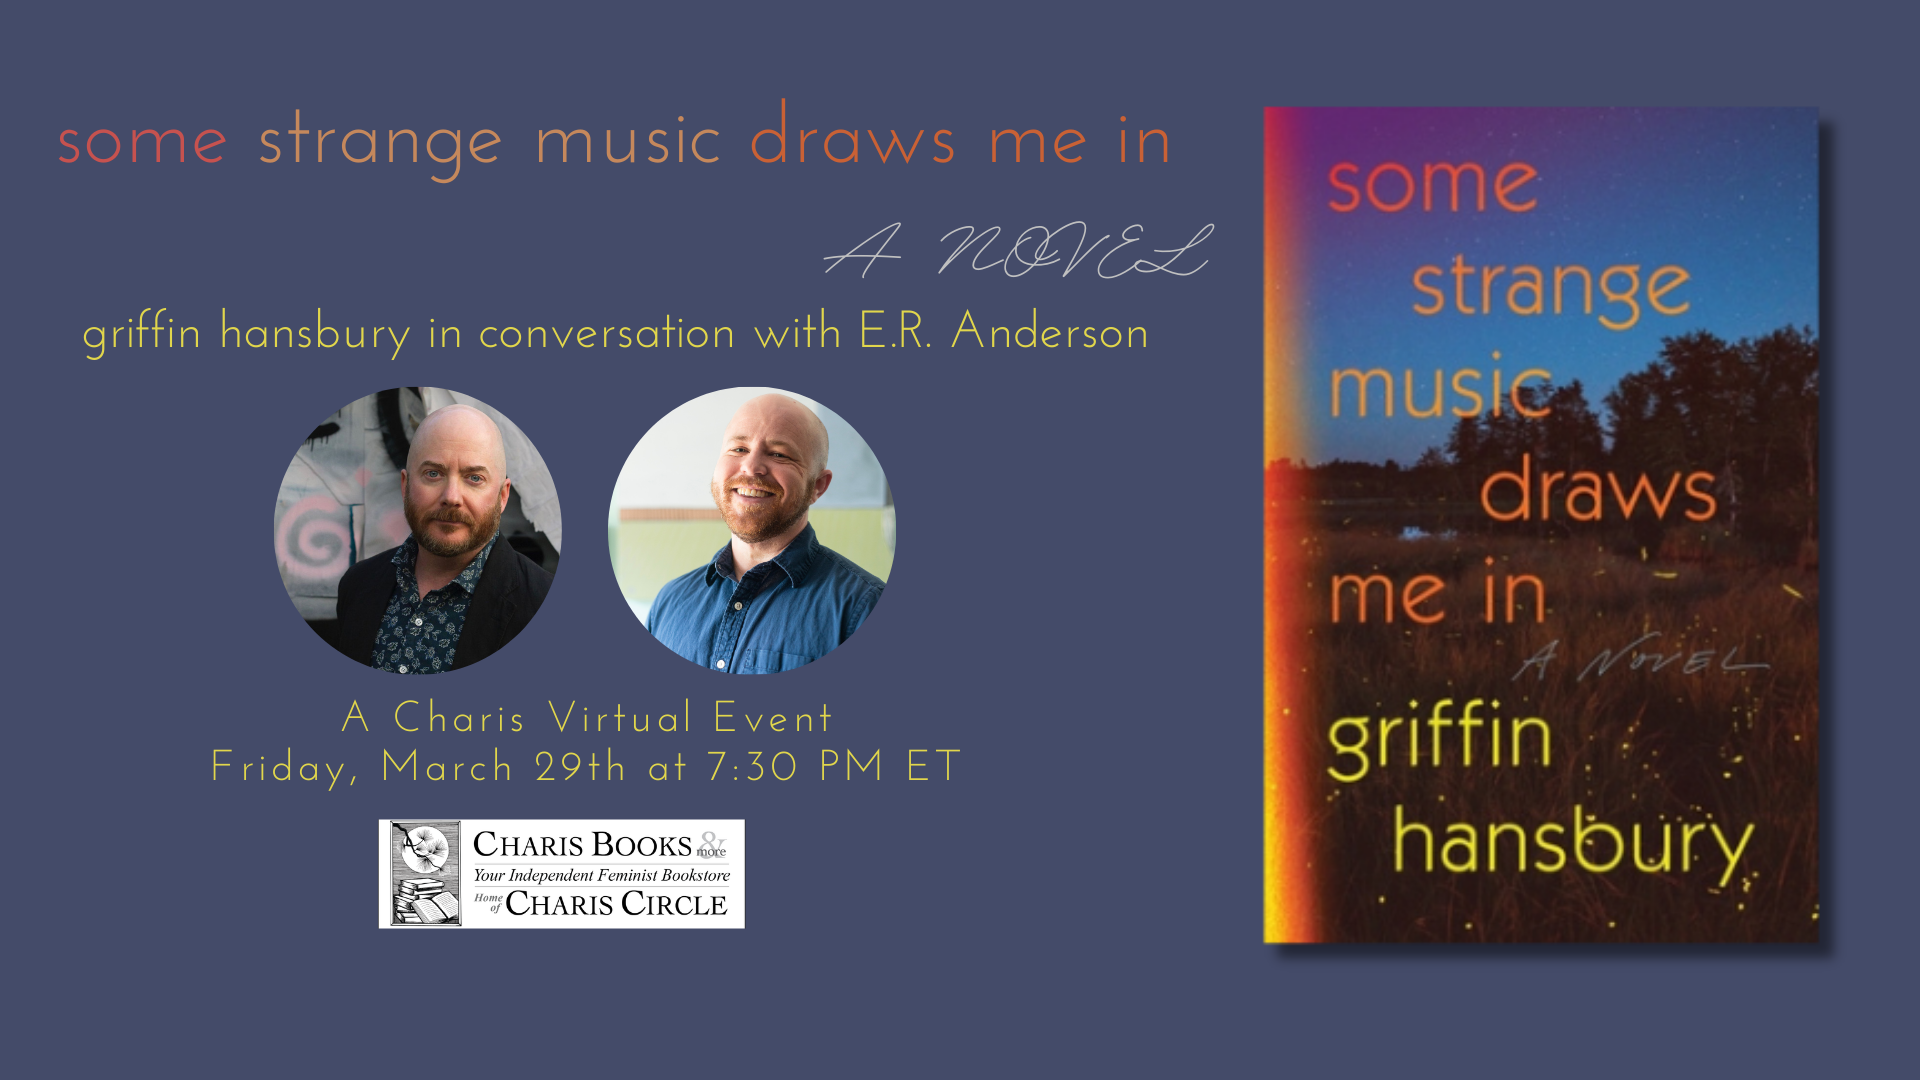 Some Strange Music Draws Me In: Griffin Hansbury in conversation with E.R. Anderson event cover photo